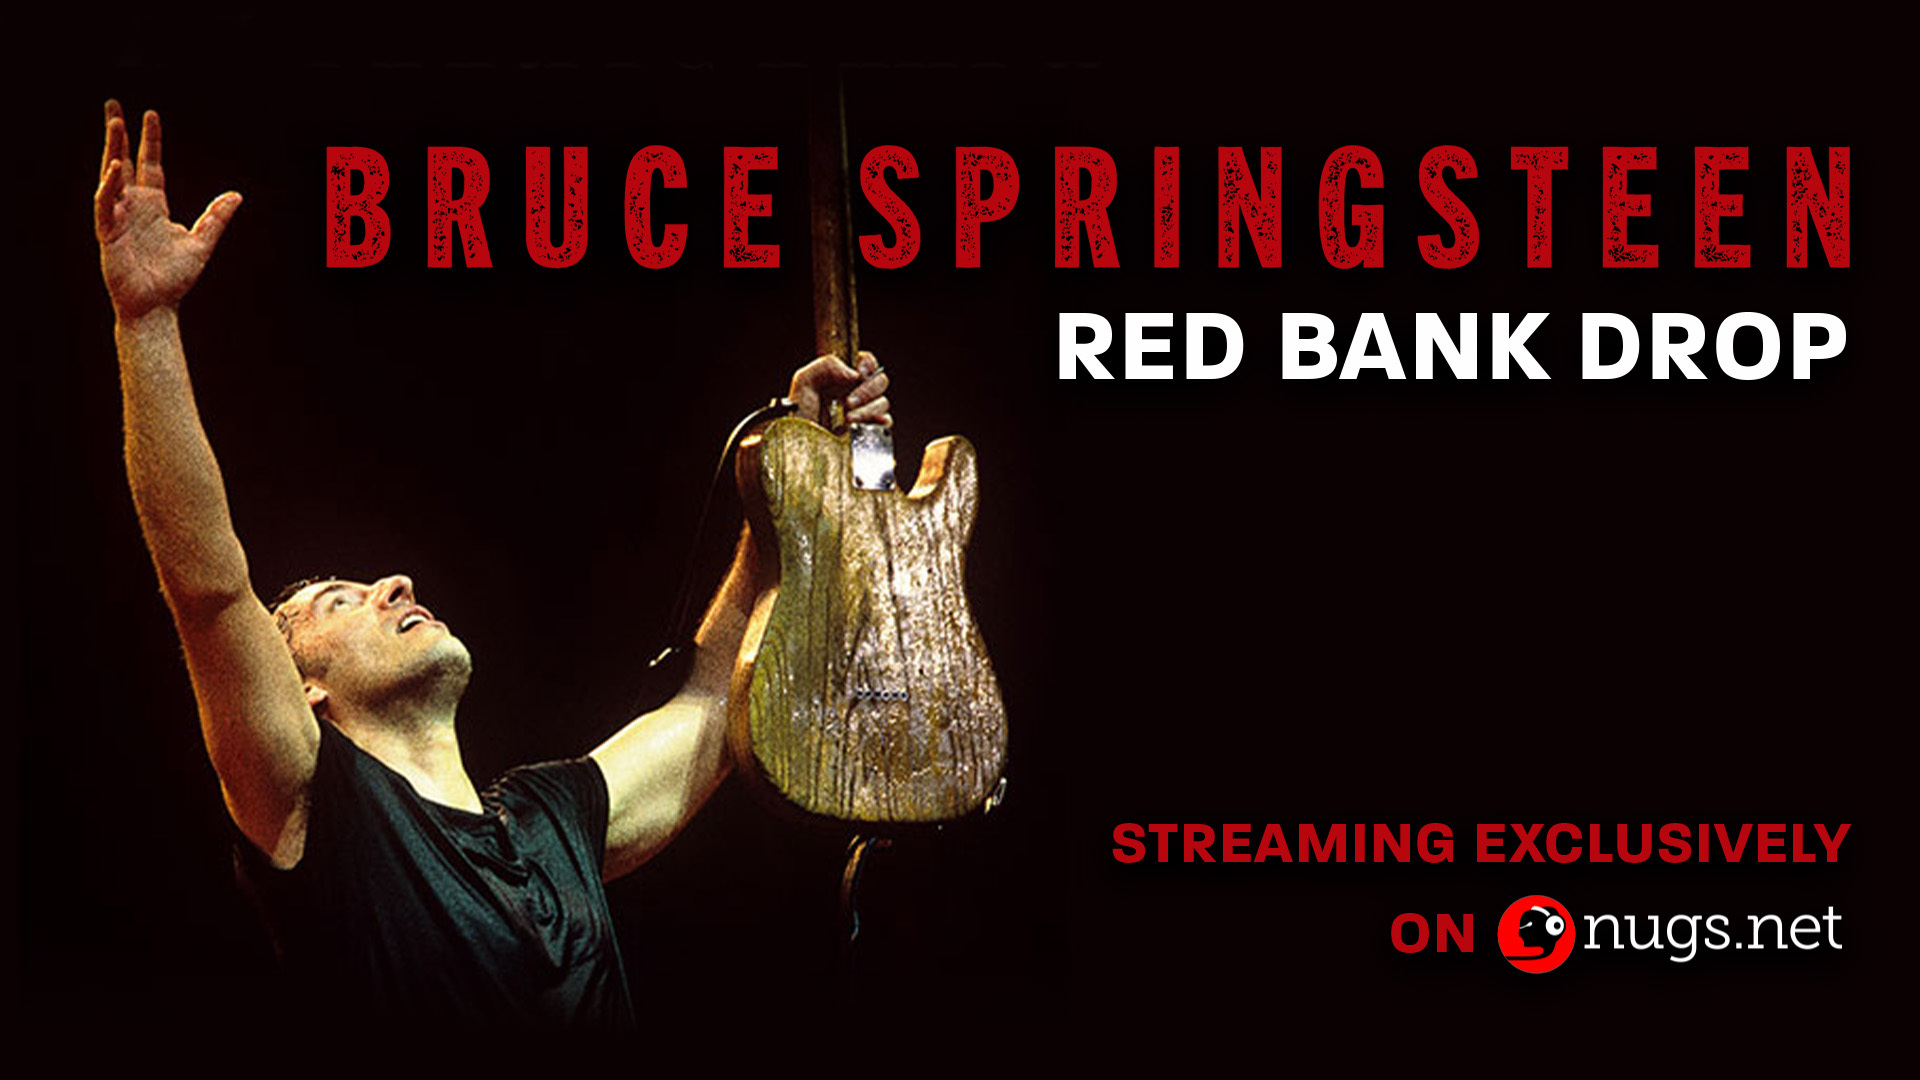 Stream The Newest Drop of Exclusive Bruce Springsteen Shows